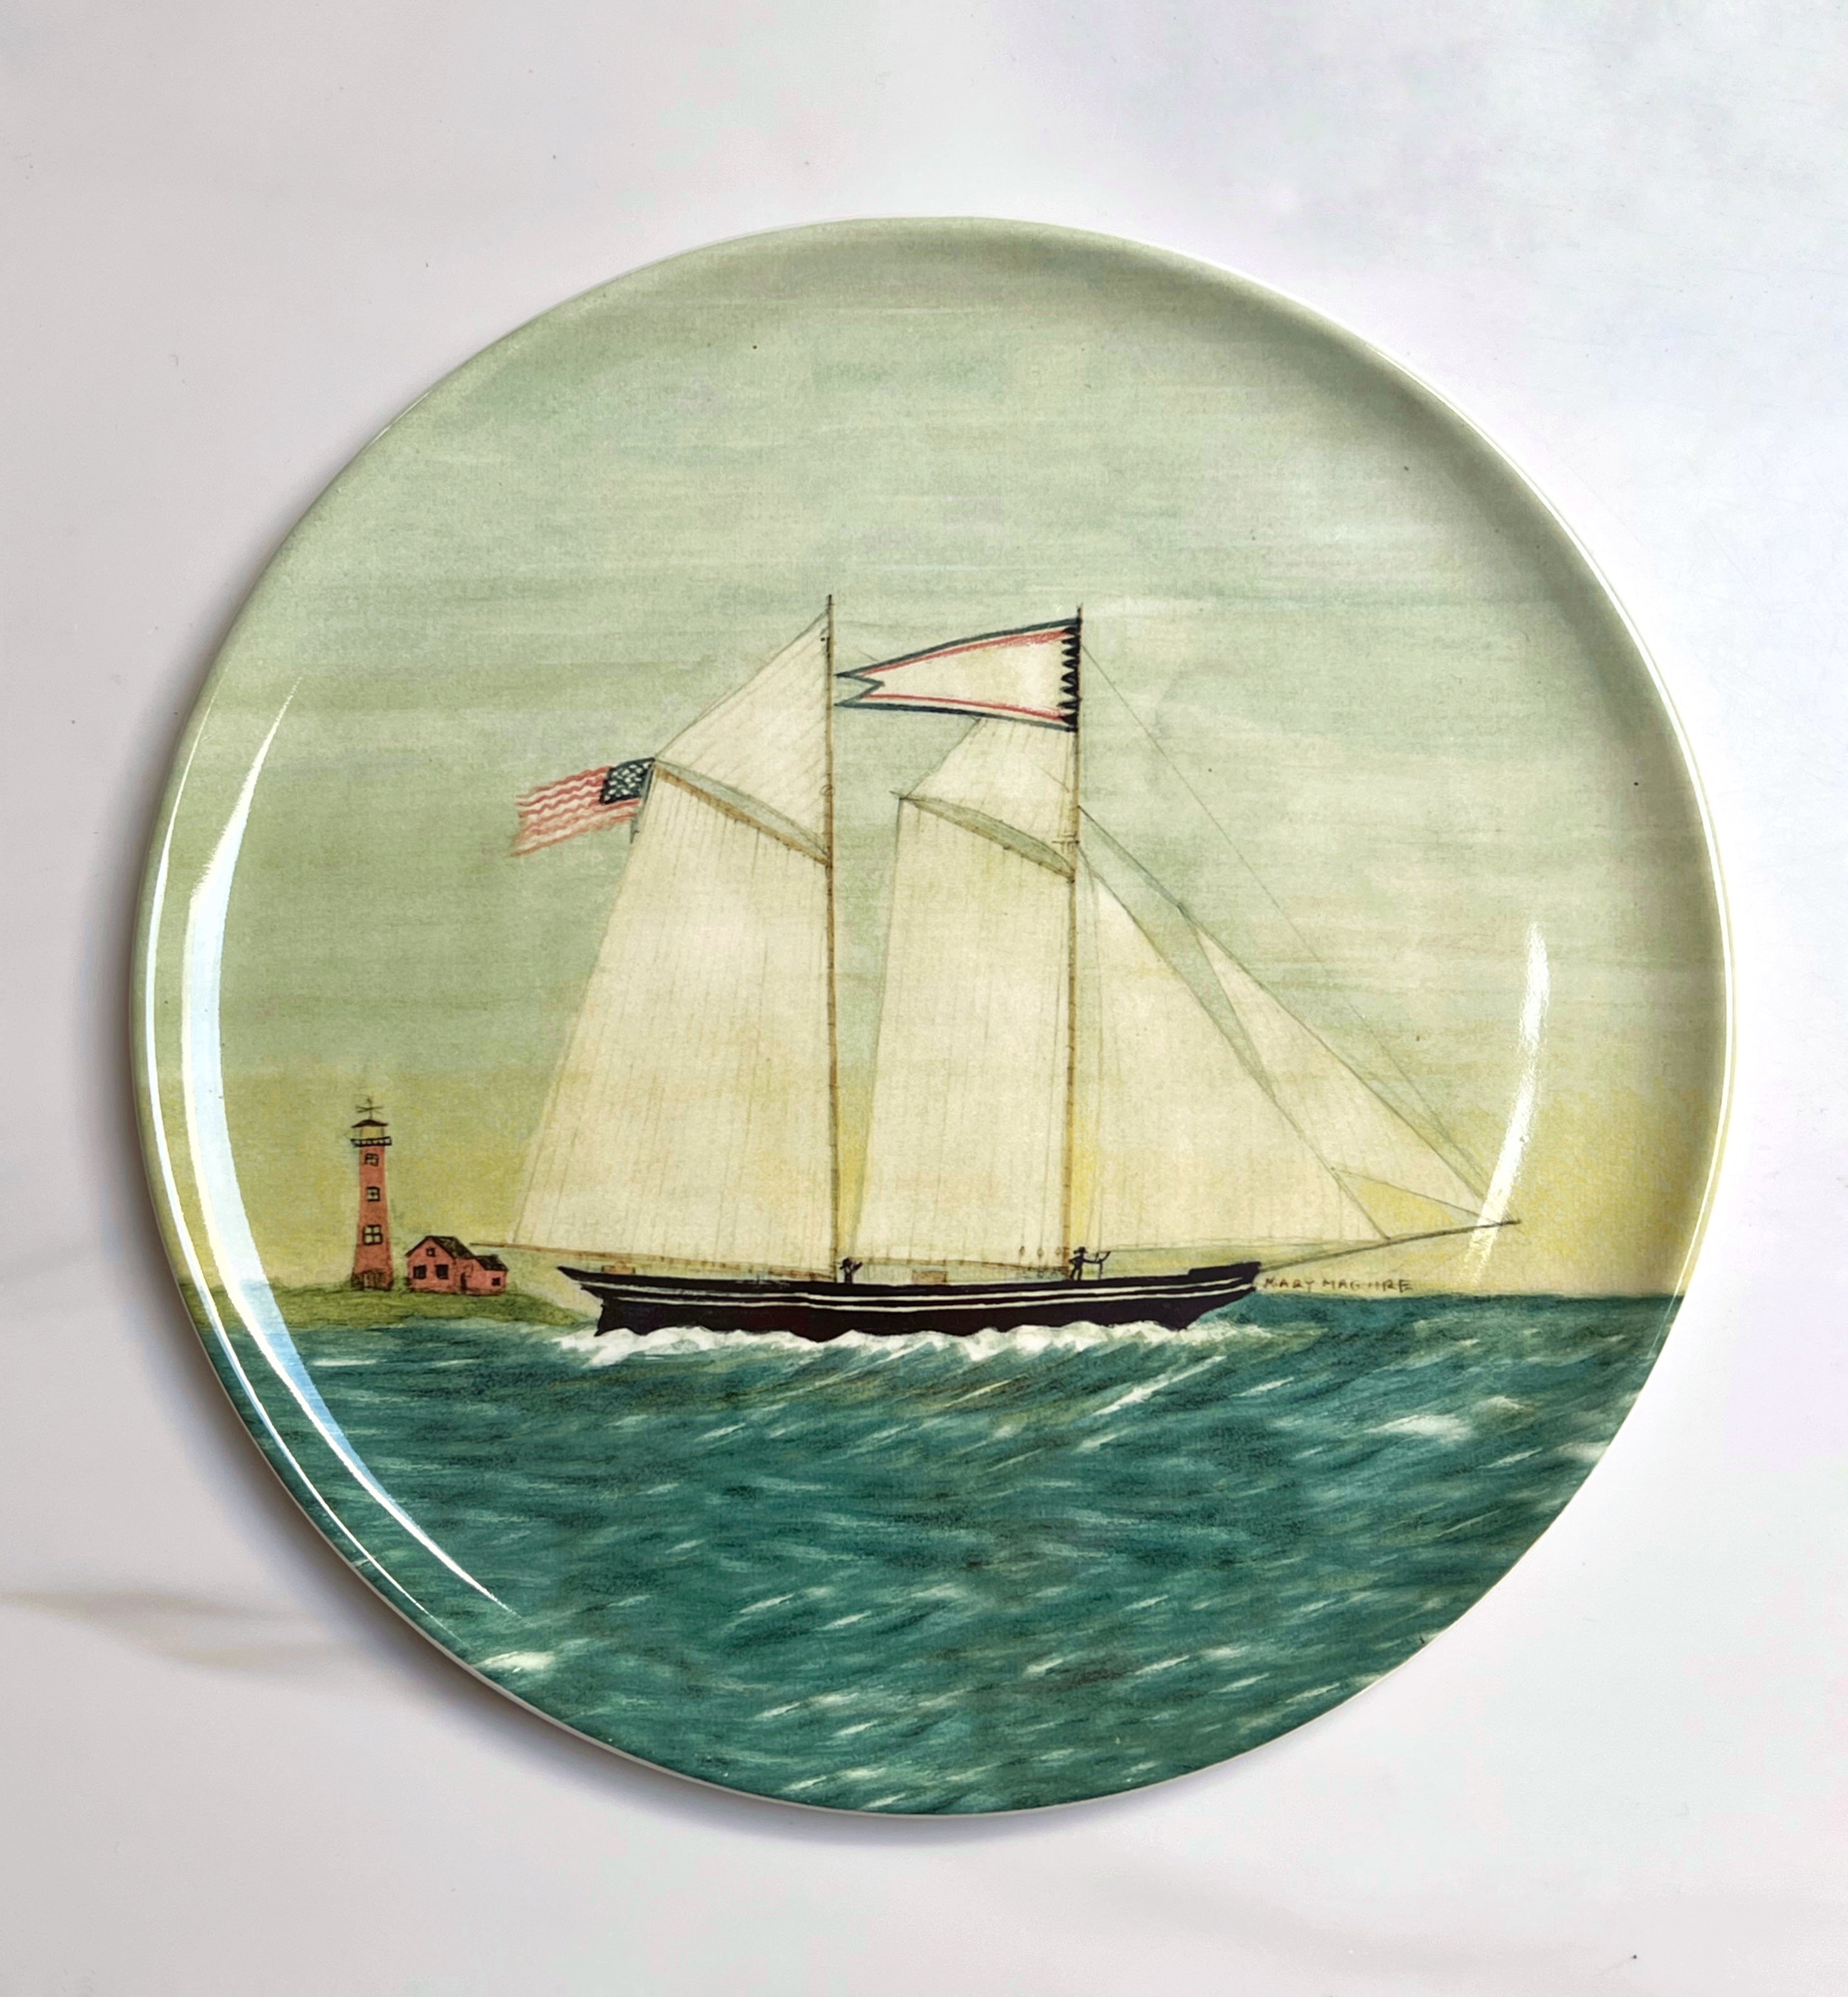 The Ship 'Emma'- Ceramic Plate by Beau Rush and Mary Maguire